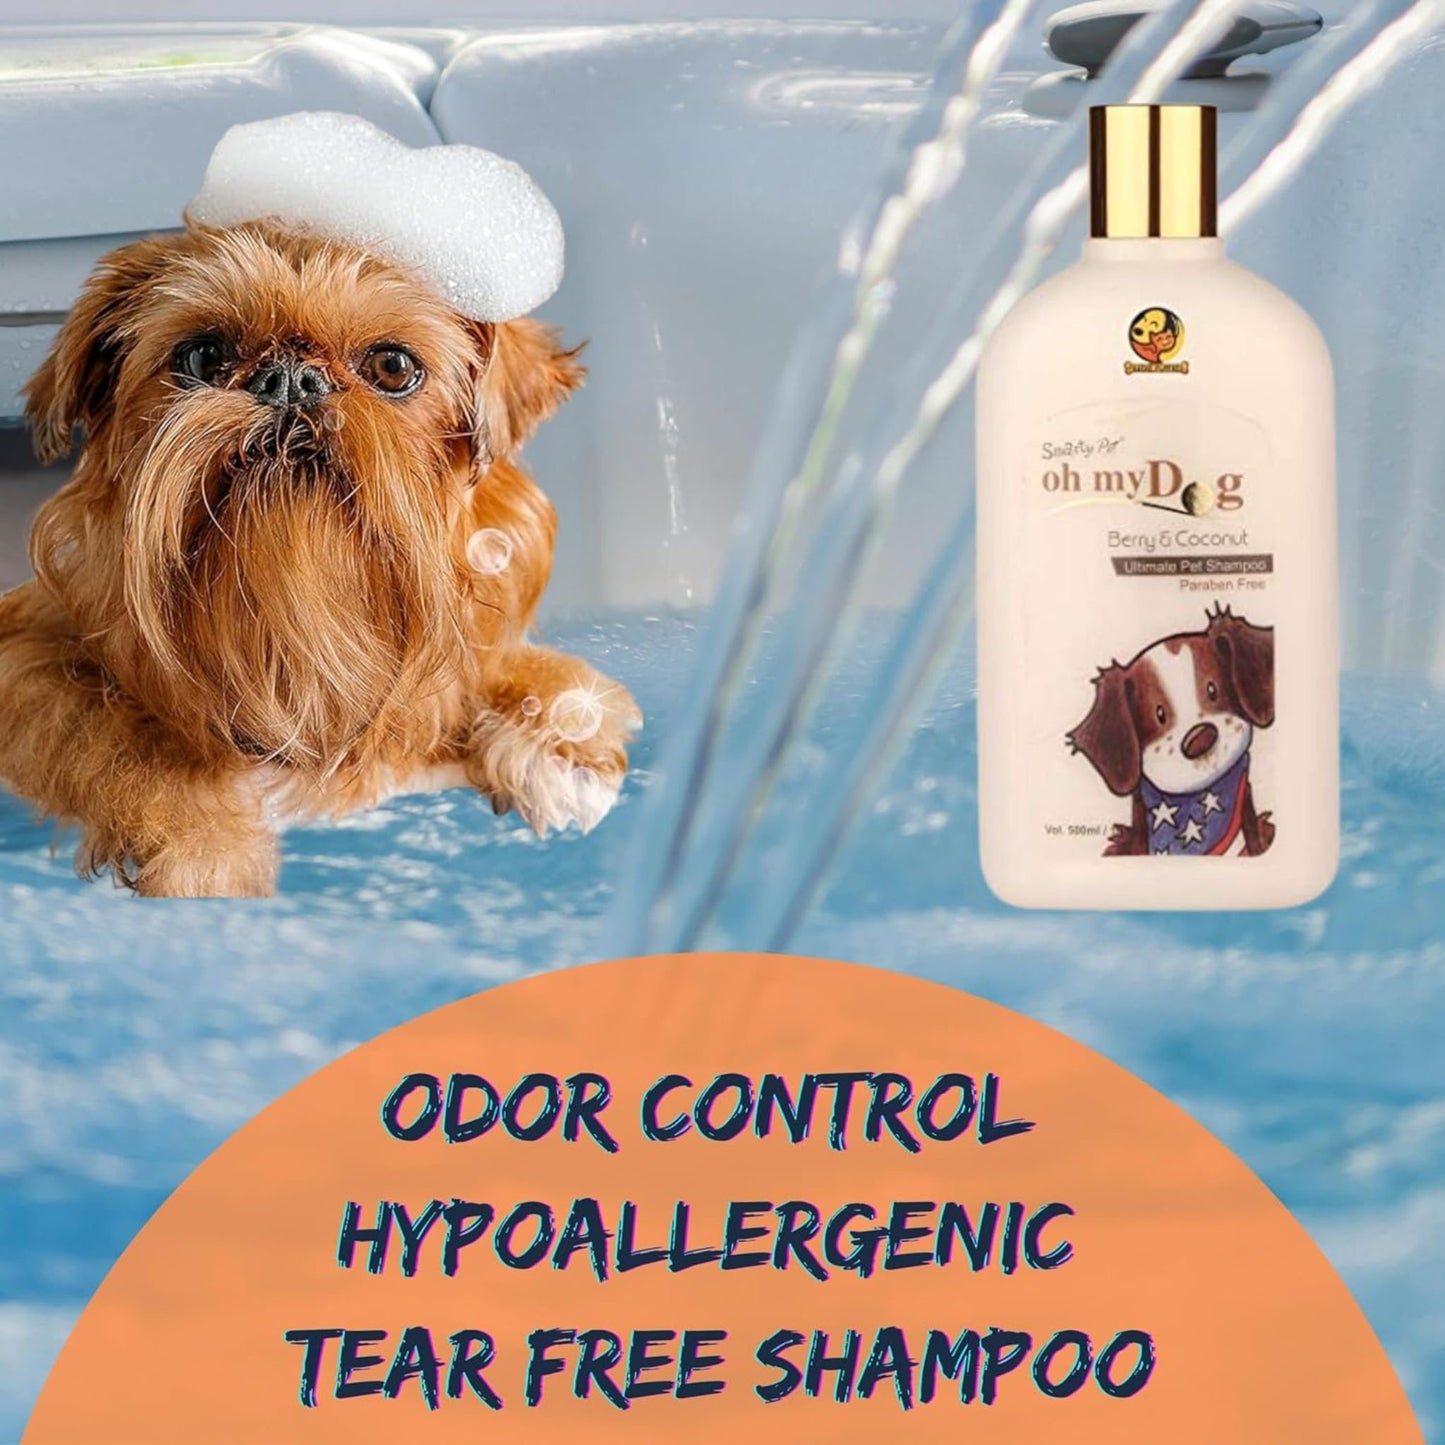 Oh My Dog Pet Shampoo for Puppies and Dogs (Berry Coconut, 1000ml)